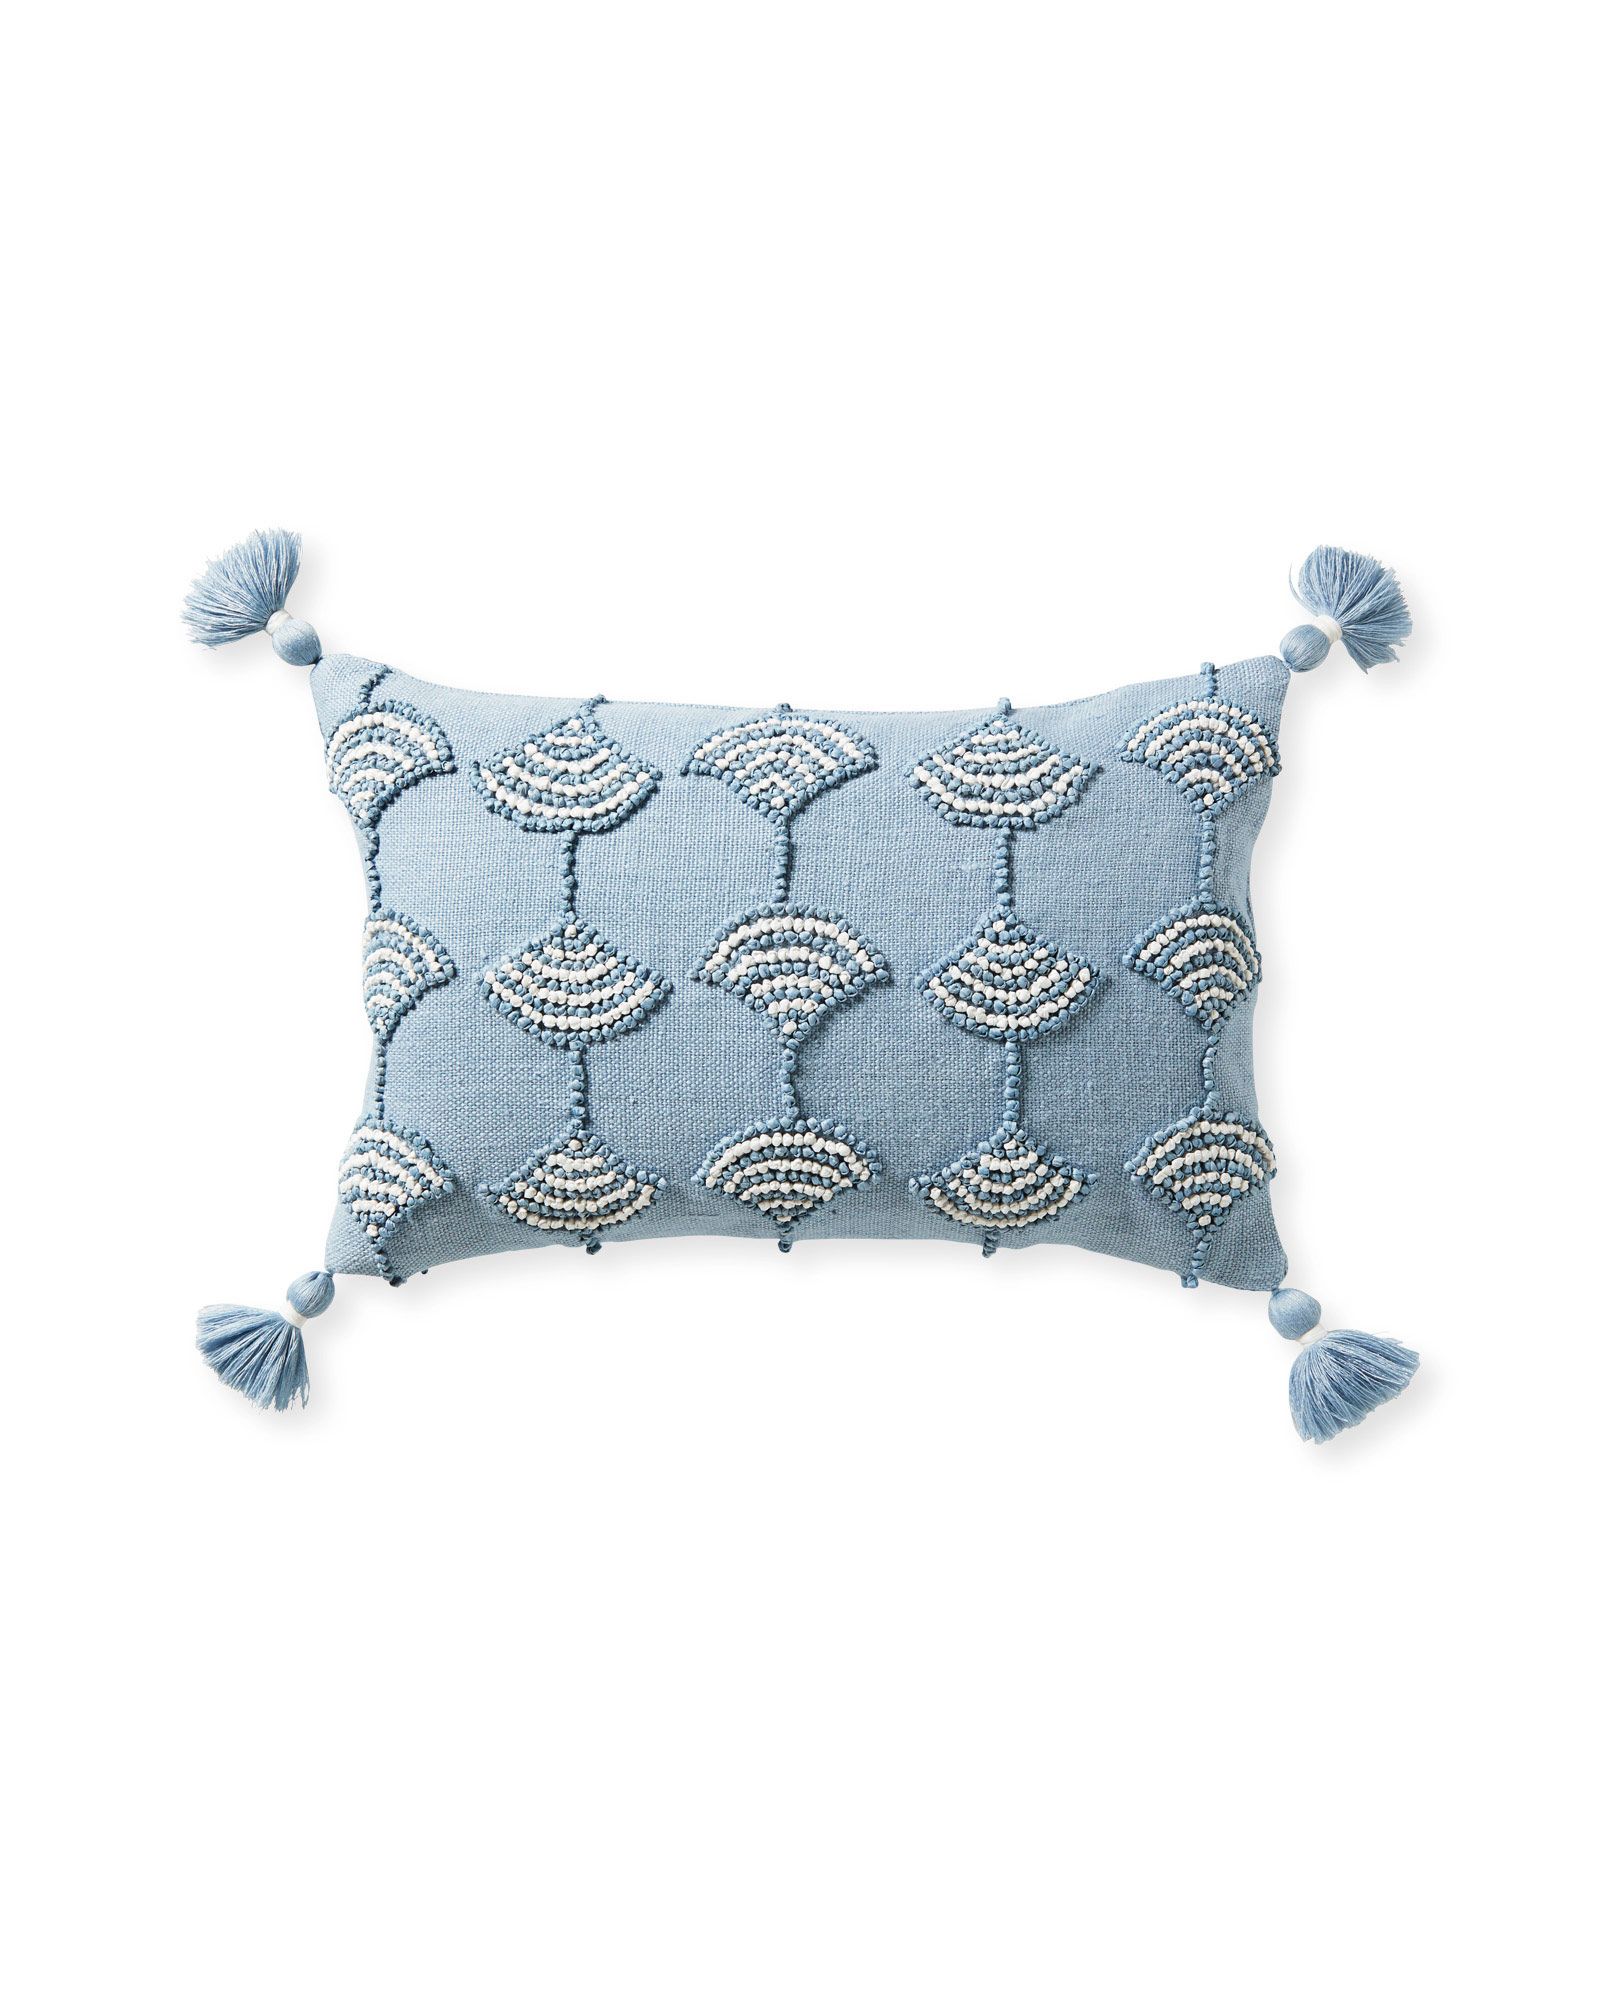 Isora Pillow Cover | Serena and Lily